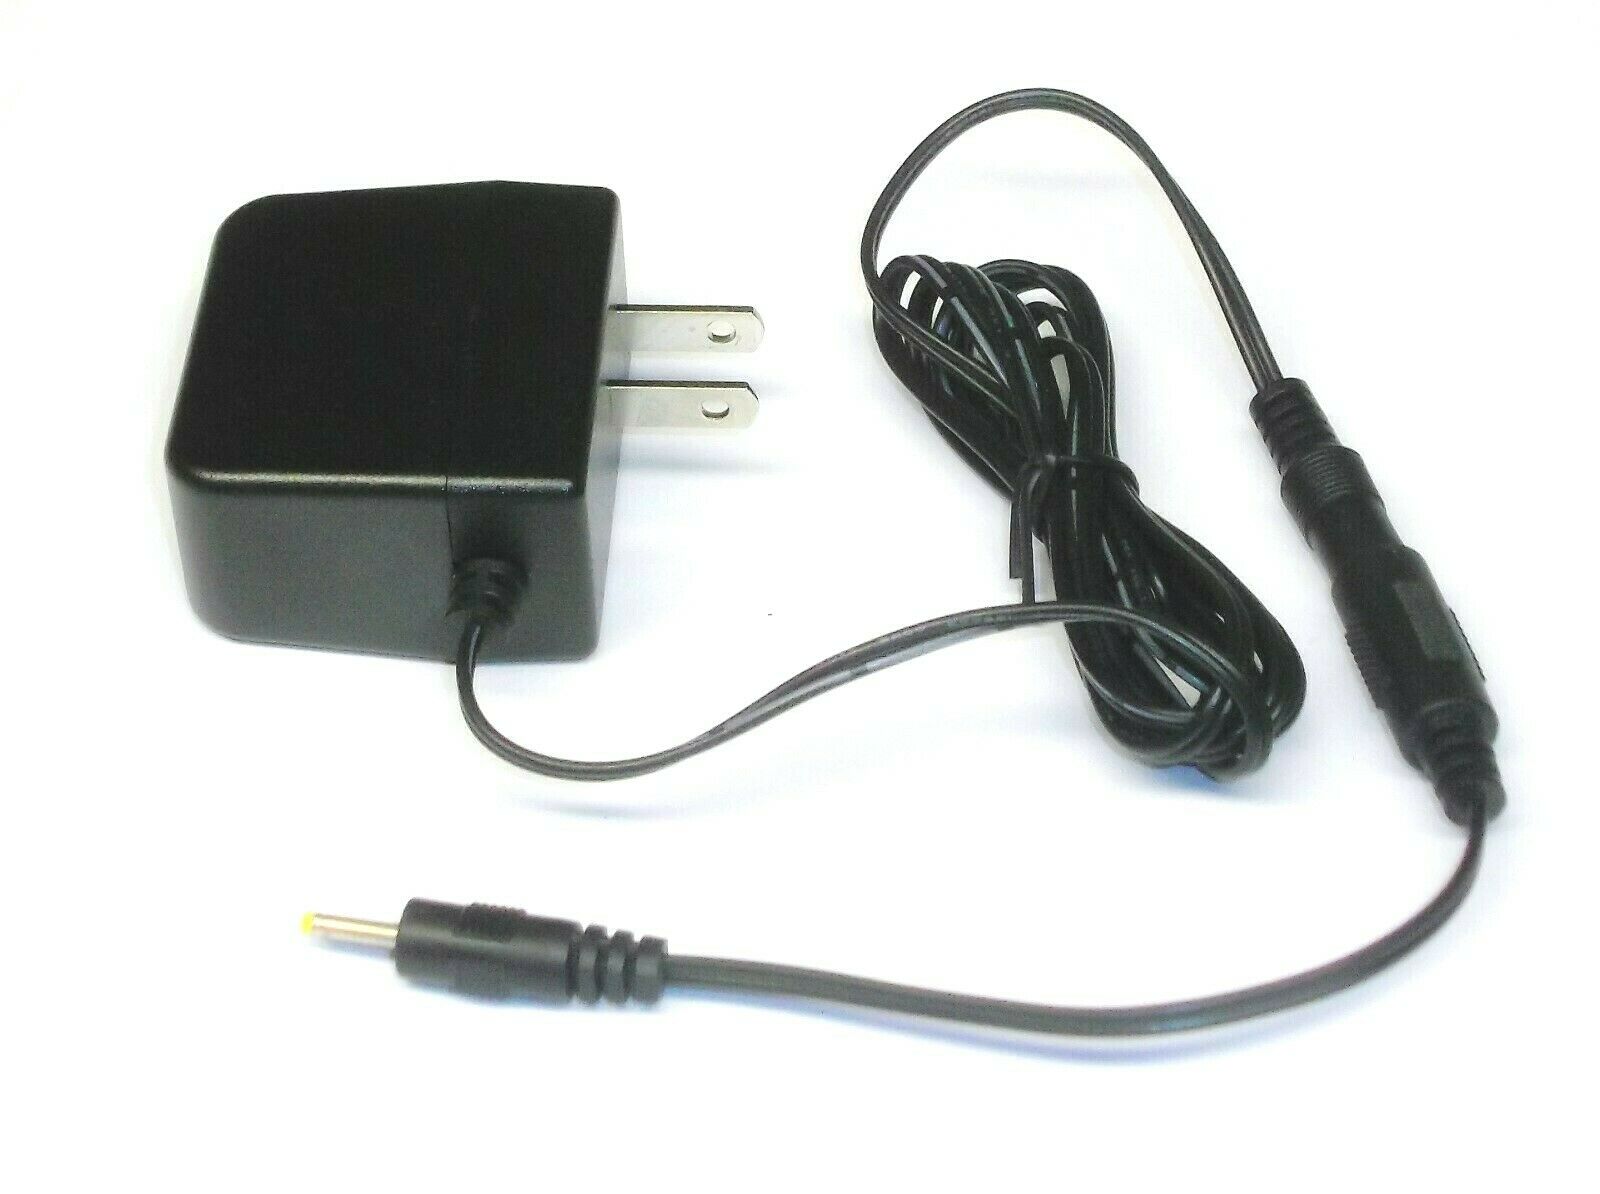 For ZIGLINT Z5 Z3 RK-2700500 Vacuum Power supply charger Adapter For: ZIGLINT Z5 Z3 RK-2700500 Adapter Input Voltage: - Click Image to Close